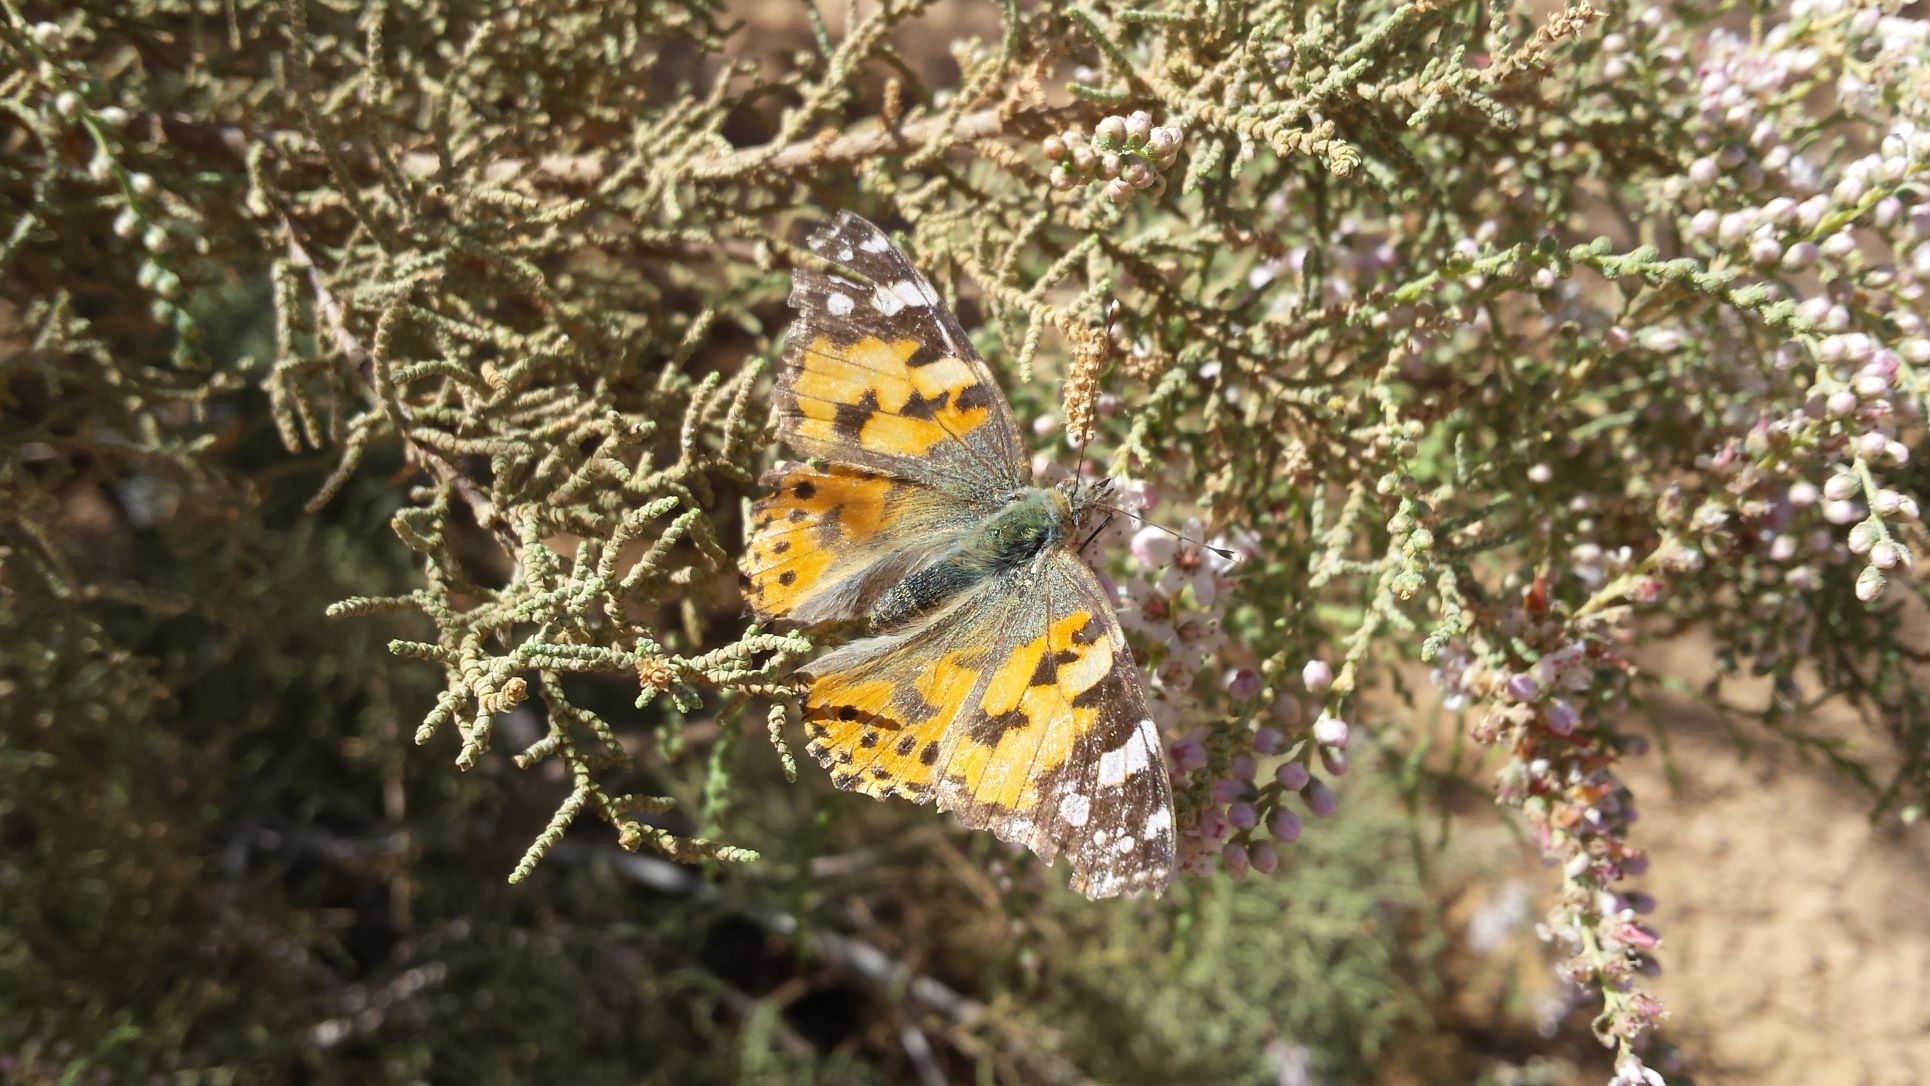 Painted lady - worn condition